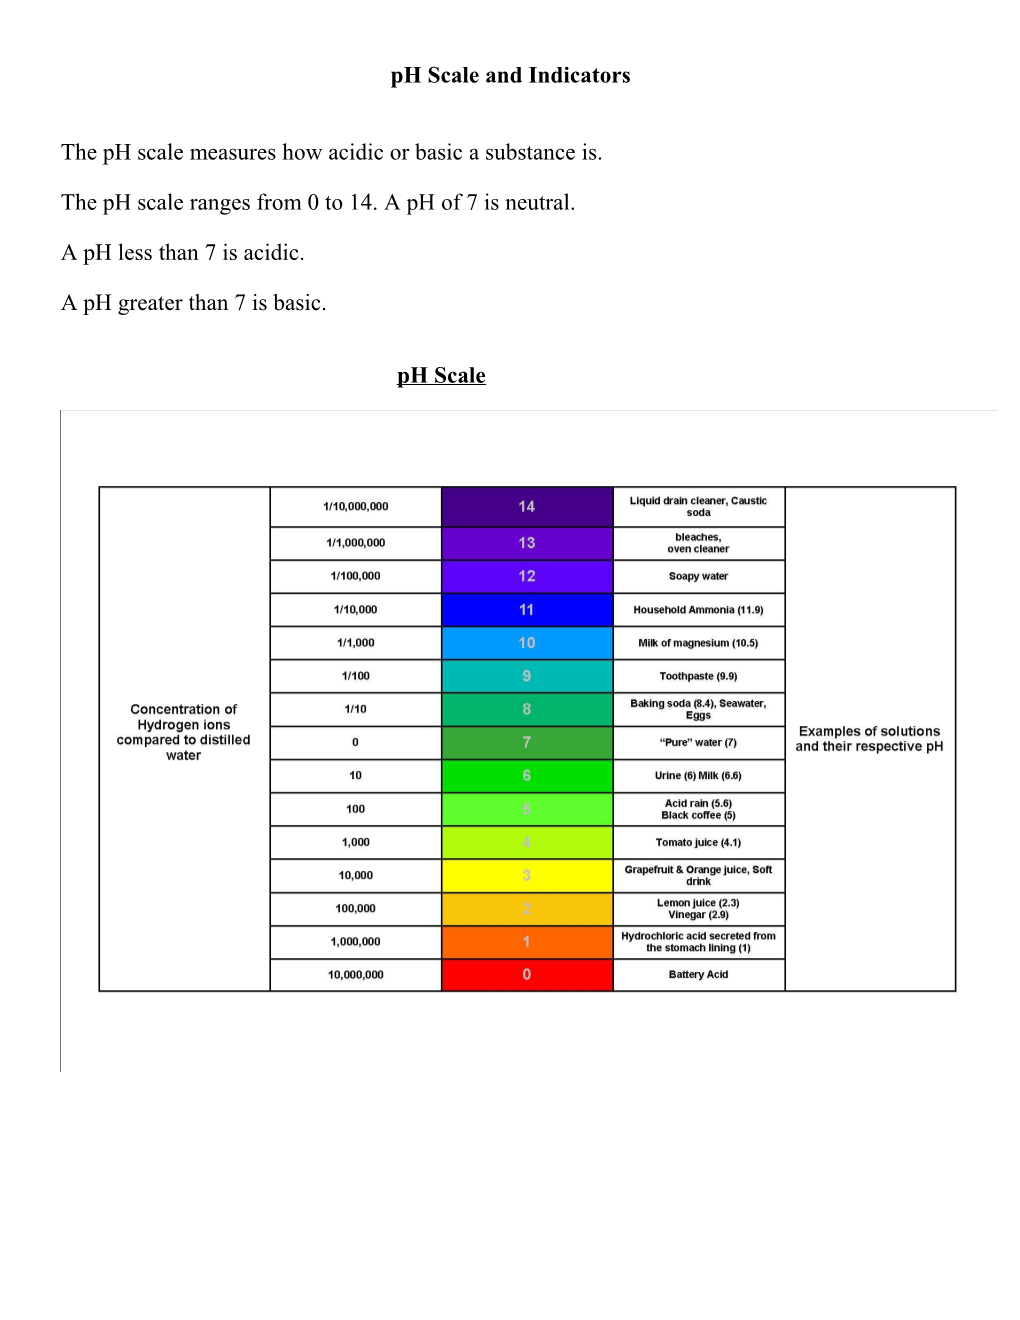 The Ph Scale Measures How Acidic Or Basic a Substance Is s1